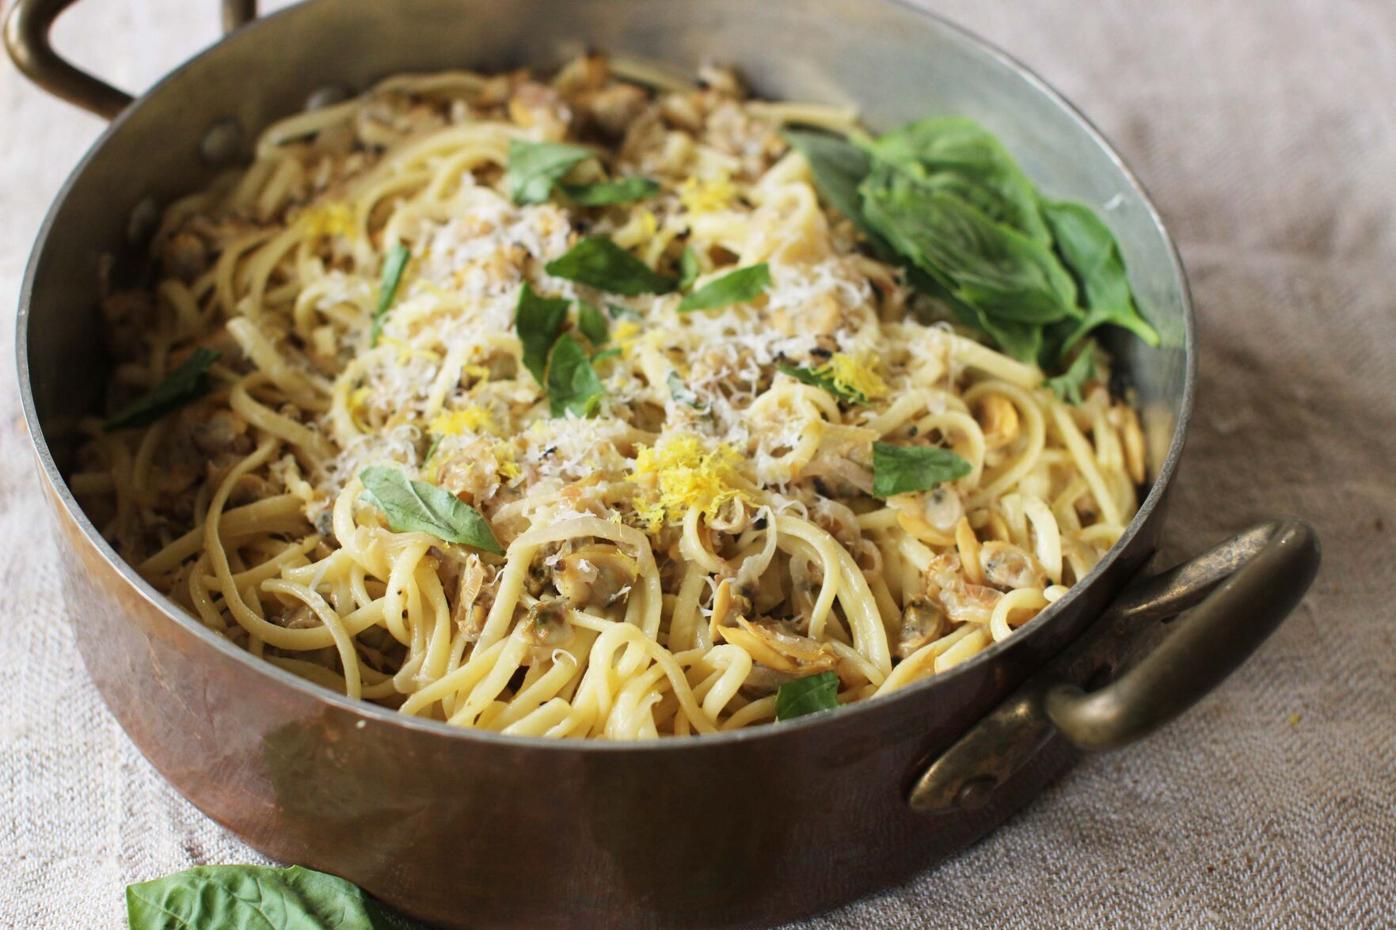 Linguine with walnuts